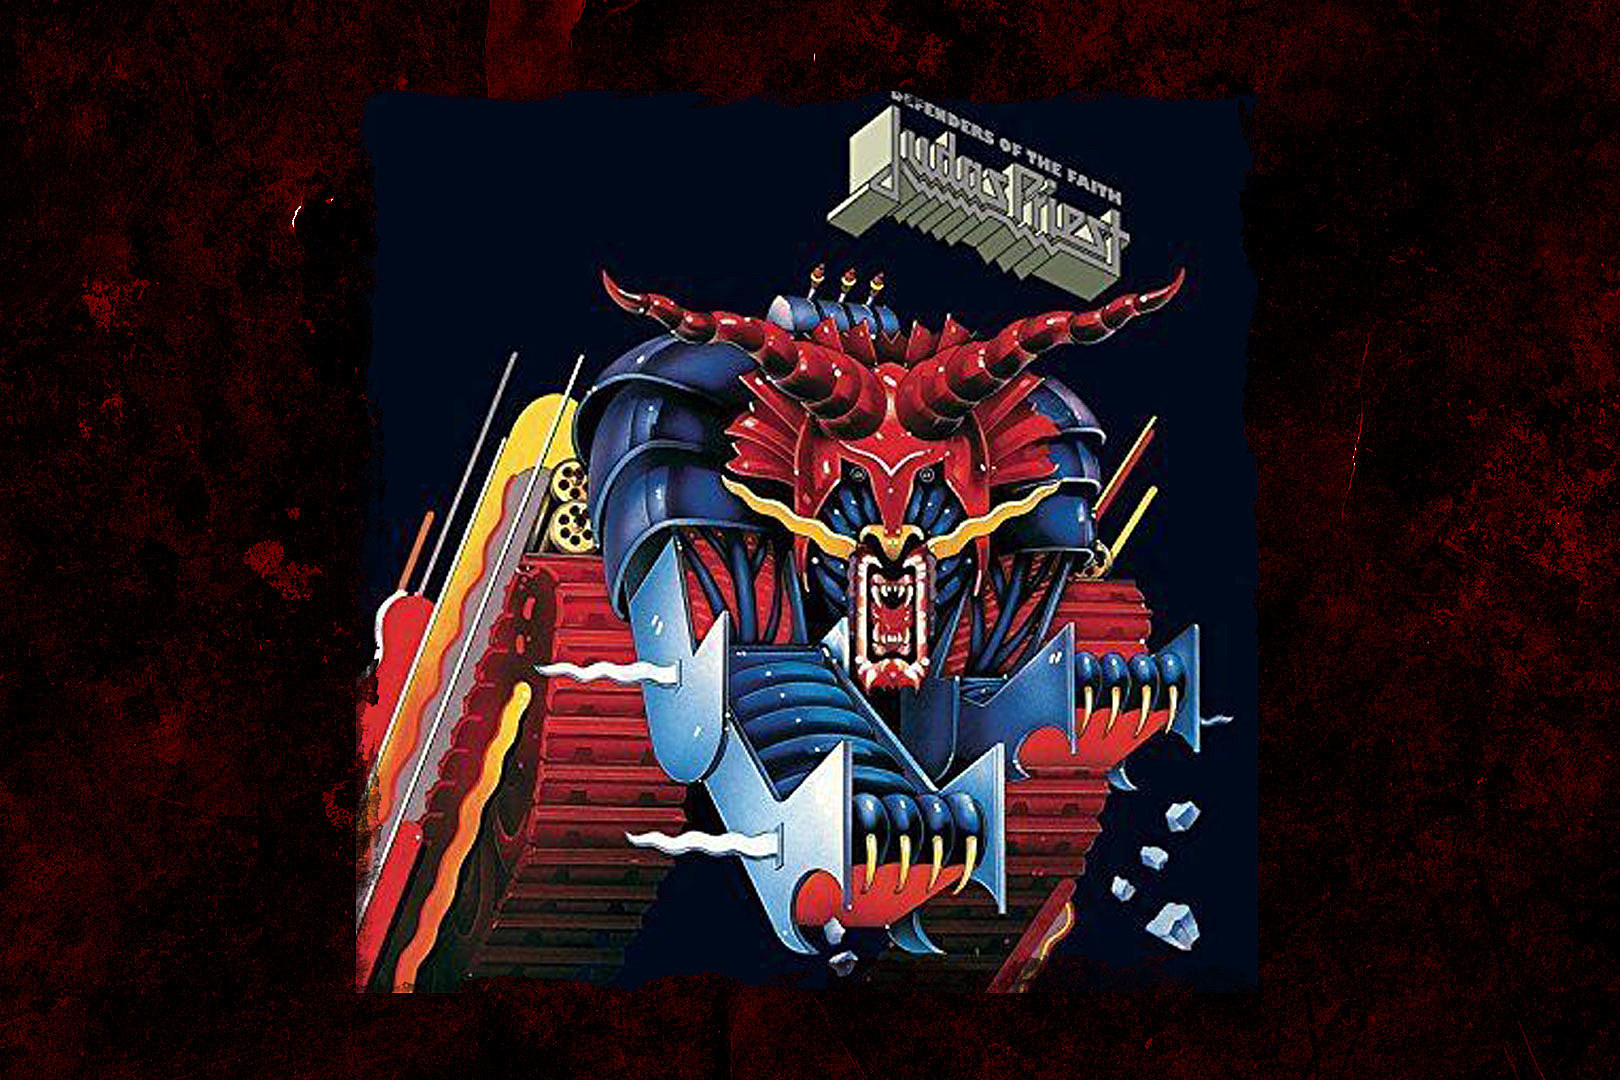 40 Years Ago: Judas Priest Release 'Defenders of the Faith'